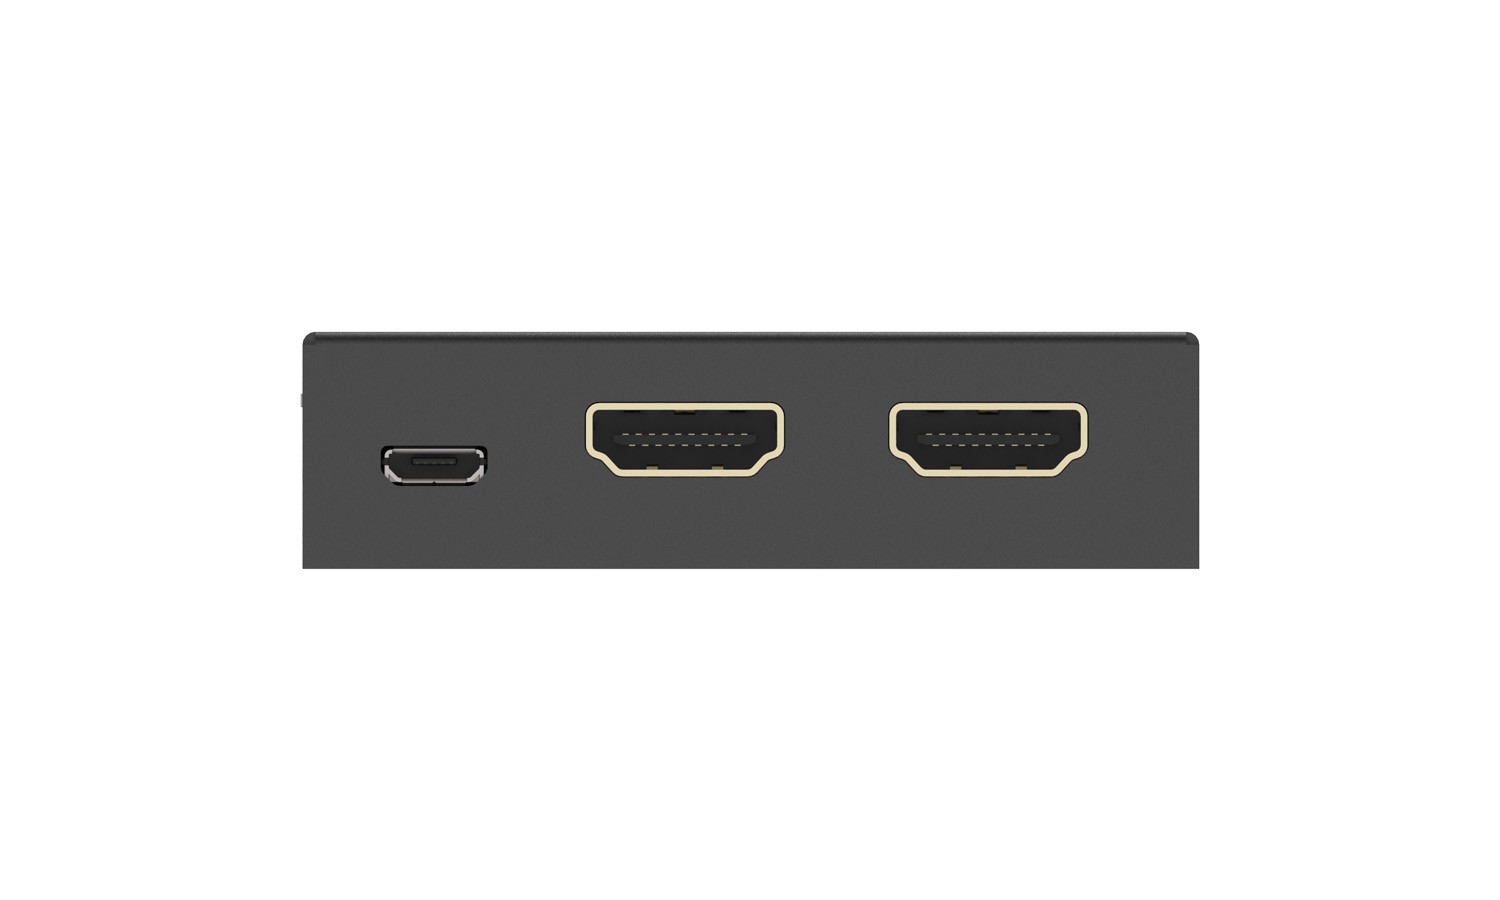 BG-EXH-70C3 4K UHD HDMI Extender with Bi-directional IR/PoC/ARC and Audio De-embedding up to 230ft by BZBGEAR